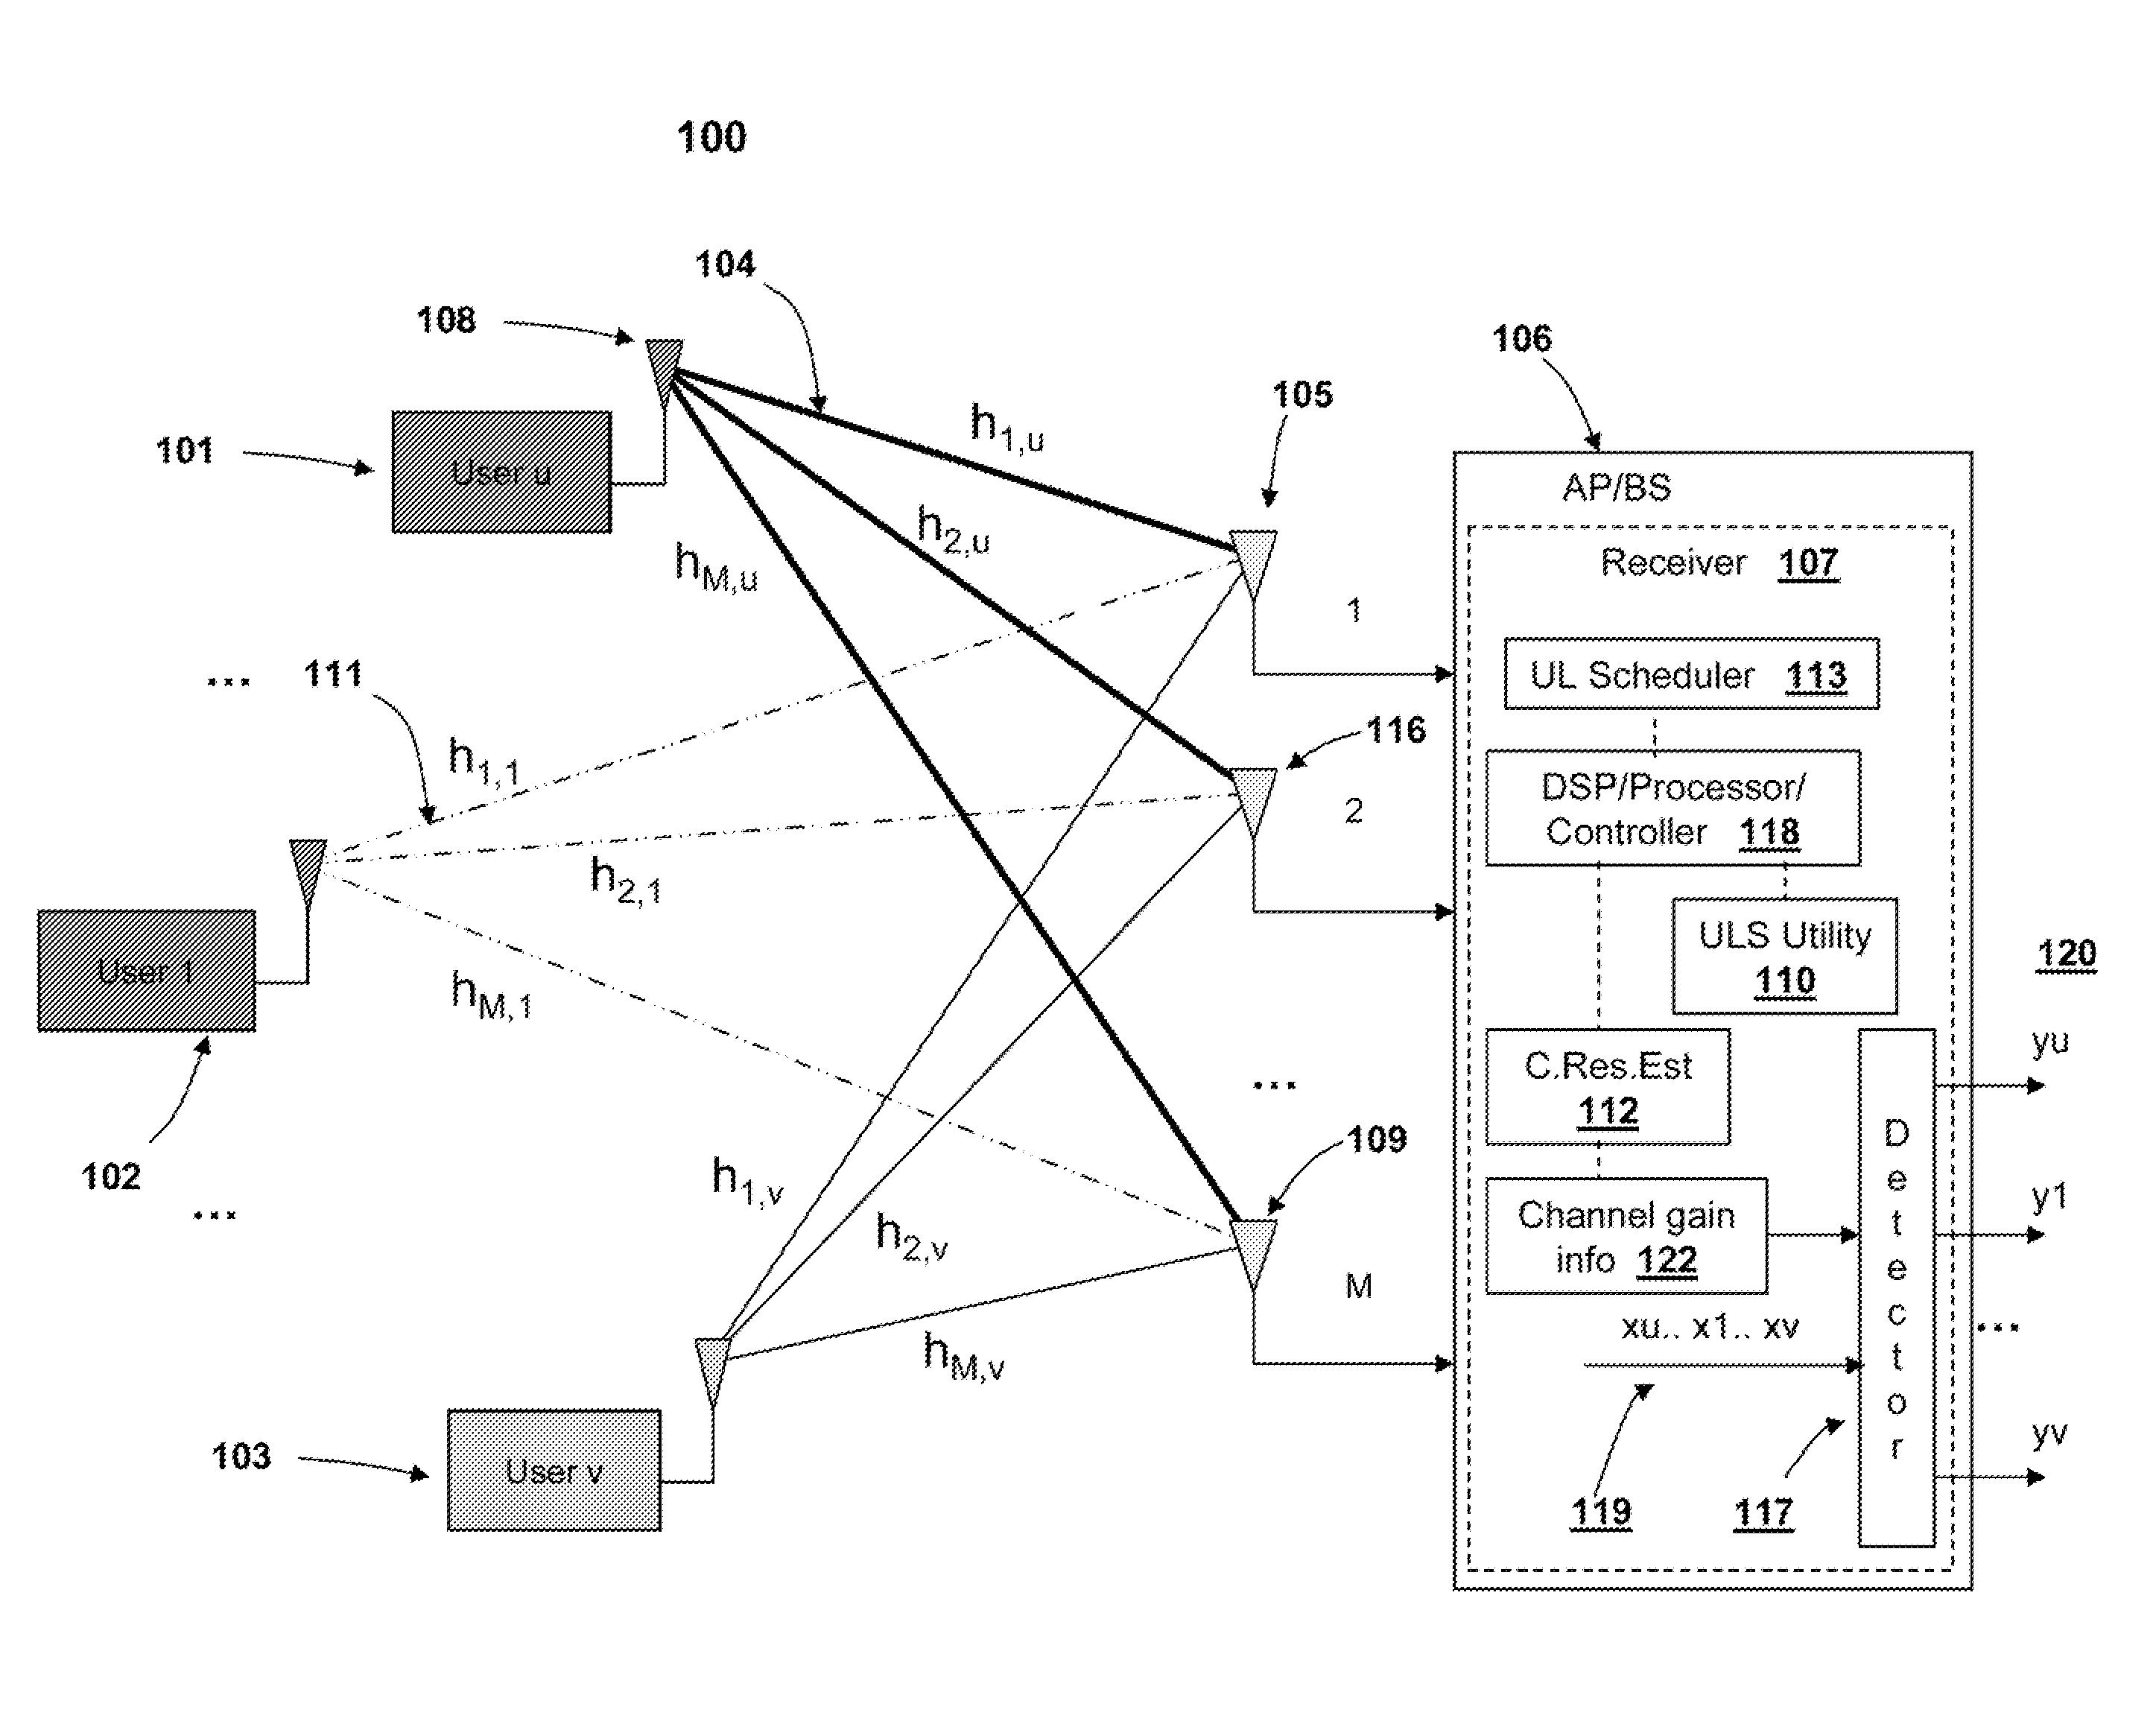 Uplink spatial division multiple access (SDMA) user pairing and scheduling